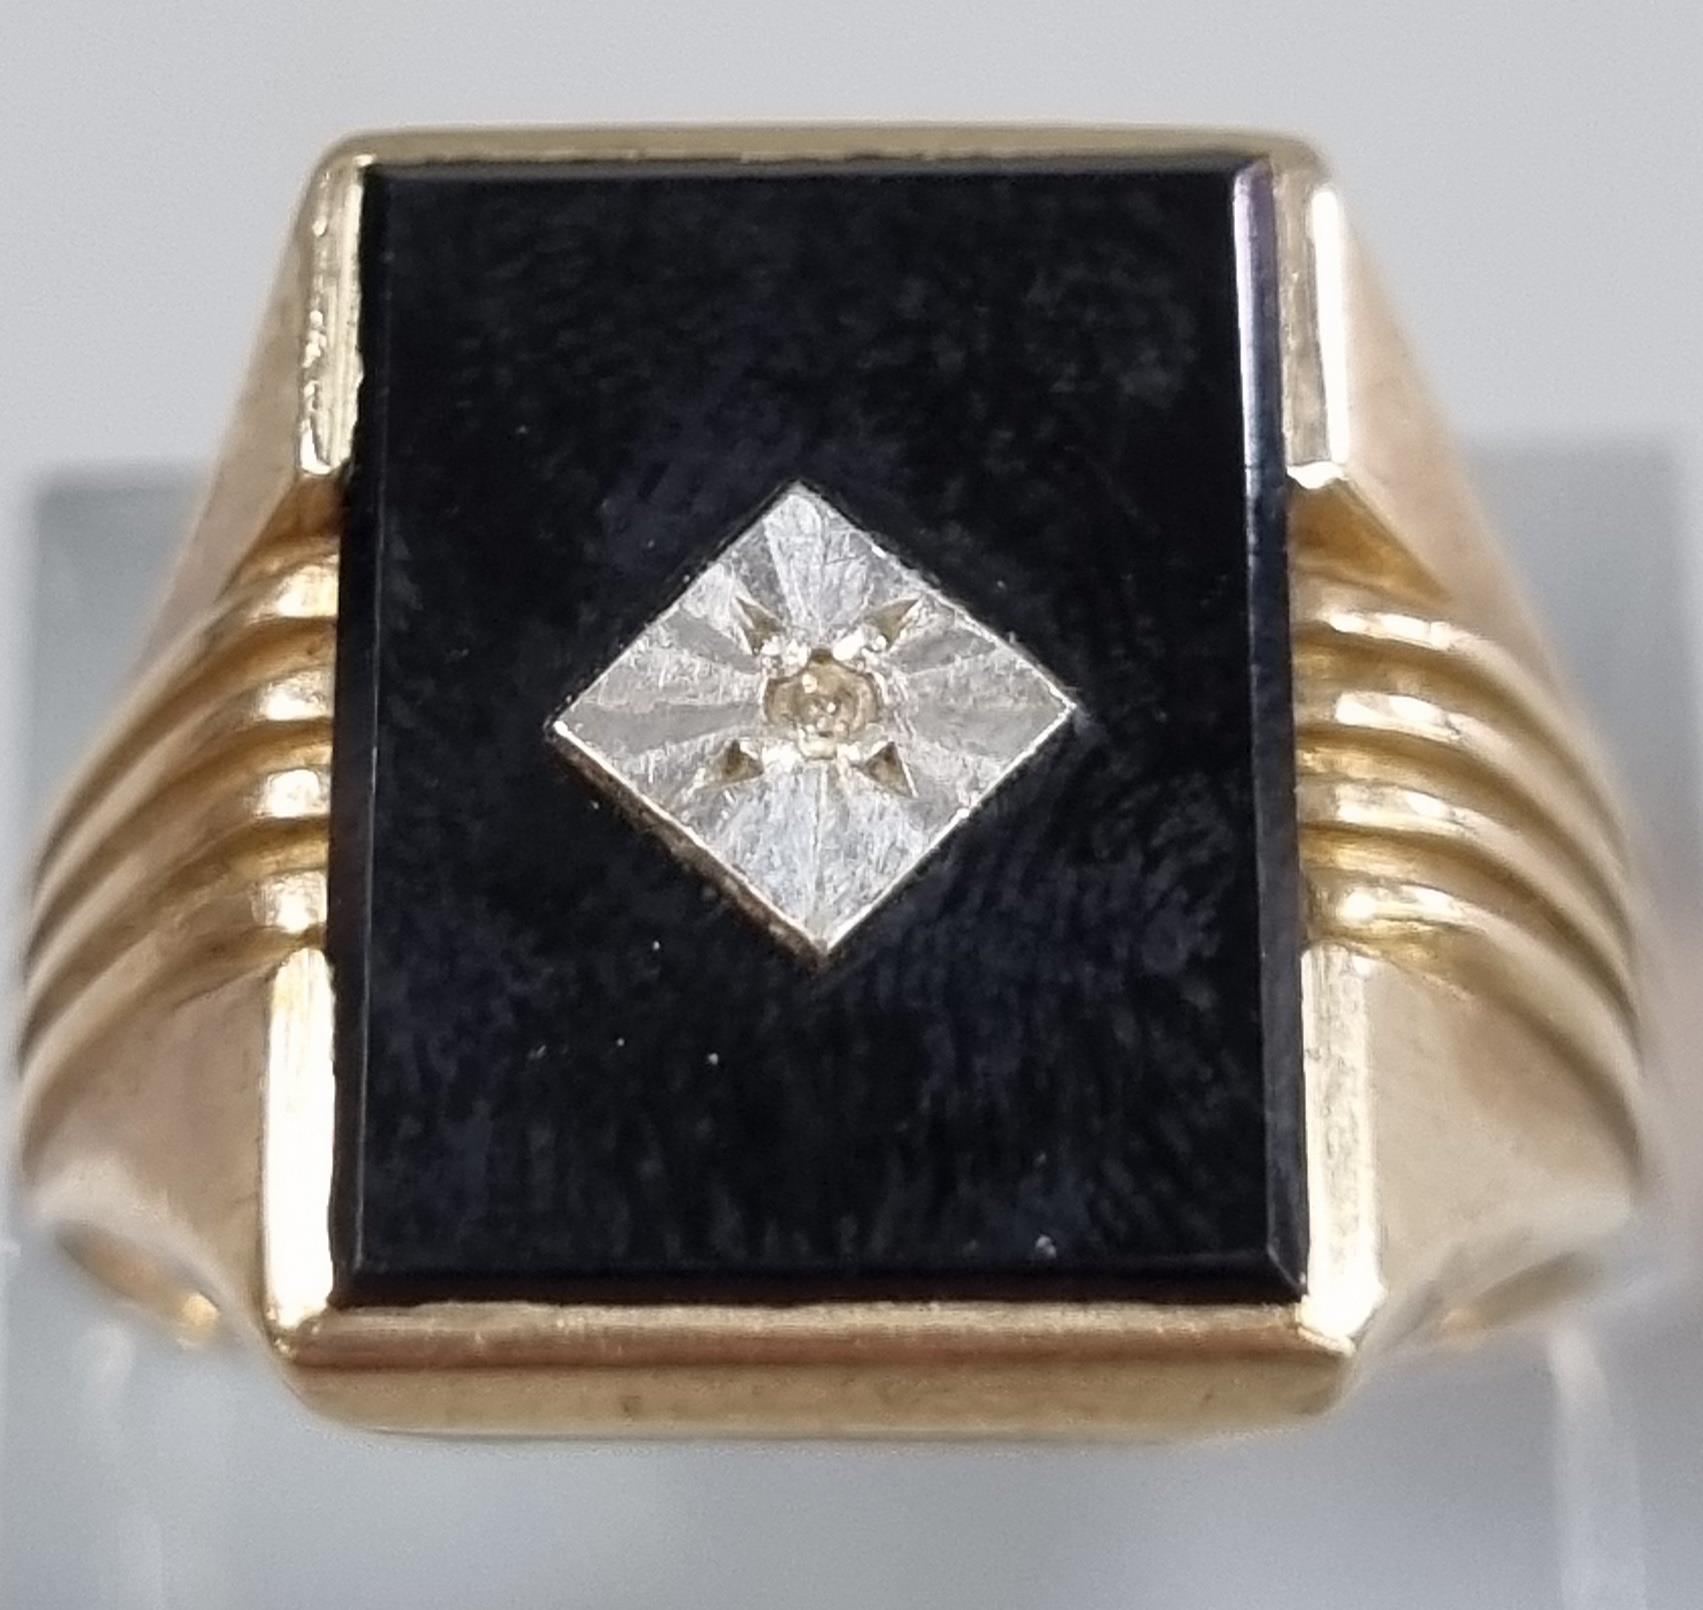 9ct gold black onyx signet ring with tiny diamond chip. 5.4g approx. Size S. (B.P. 21% + VAT) - Image 2 of 4